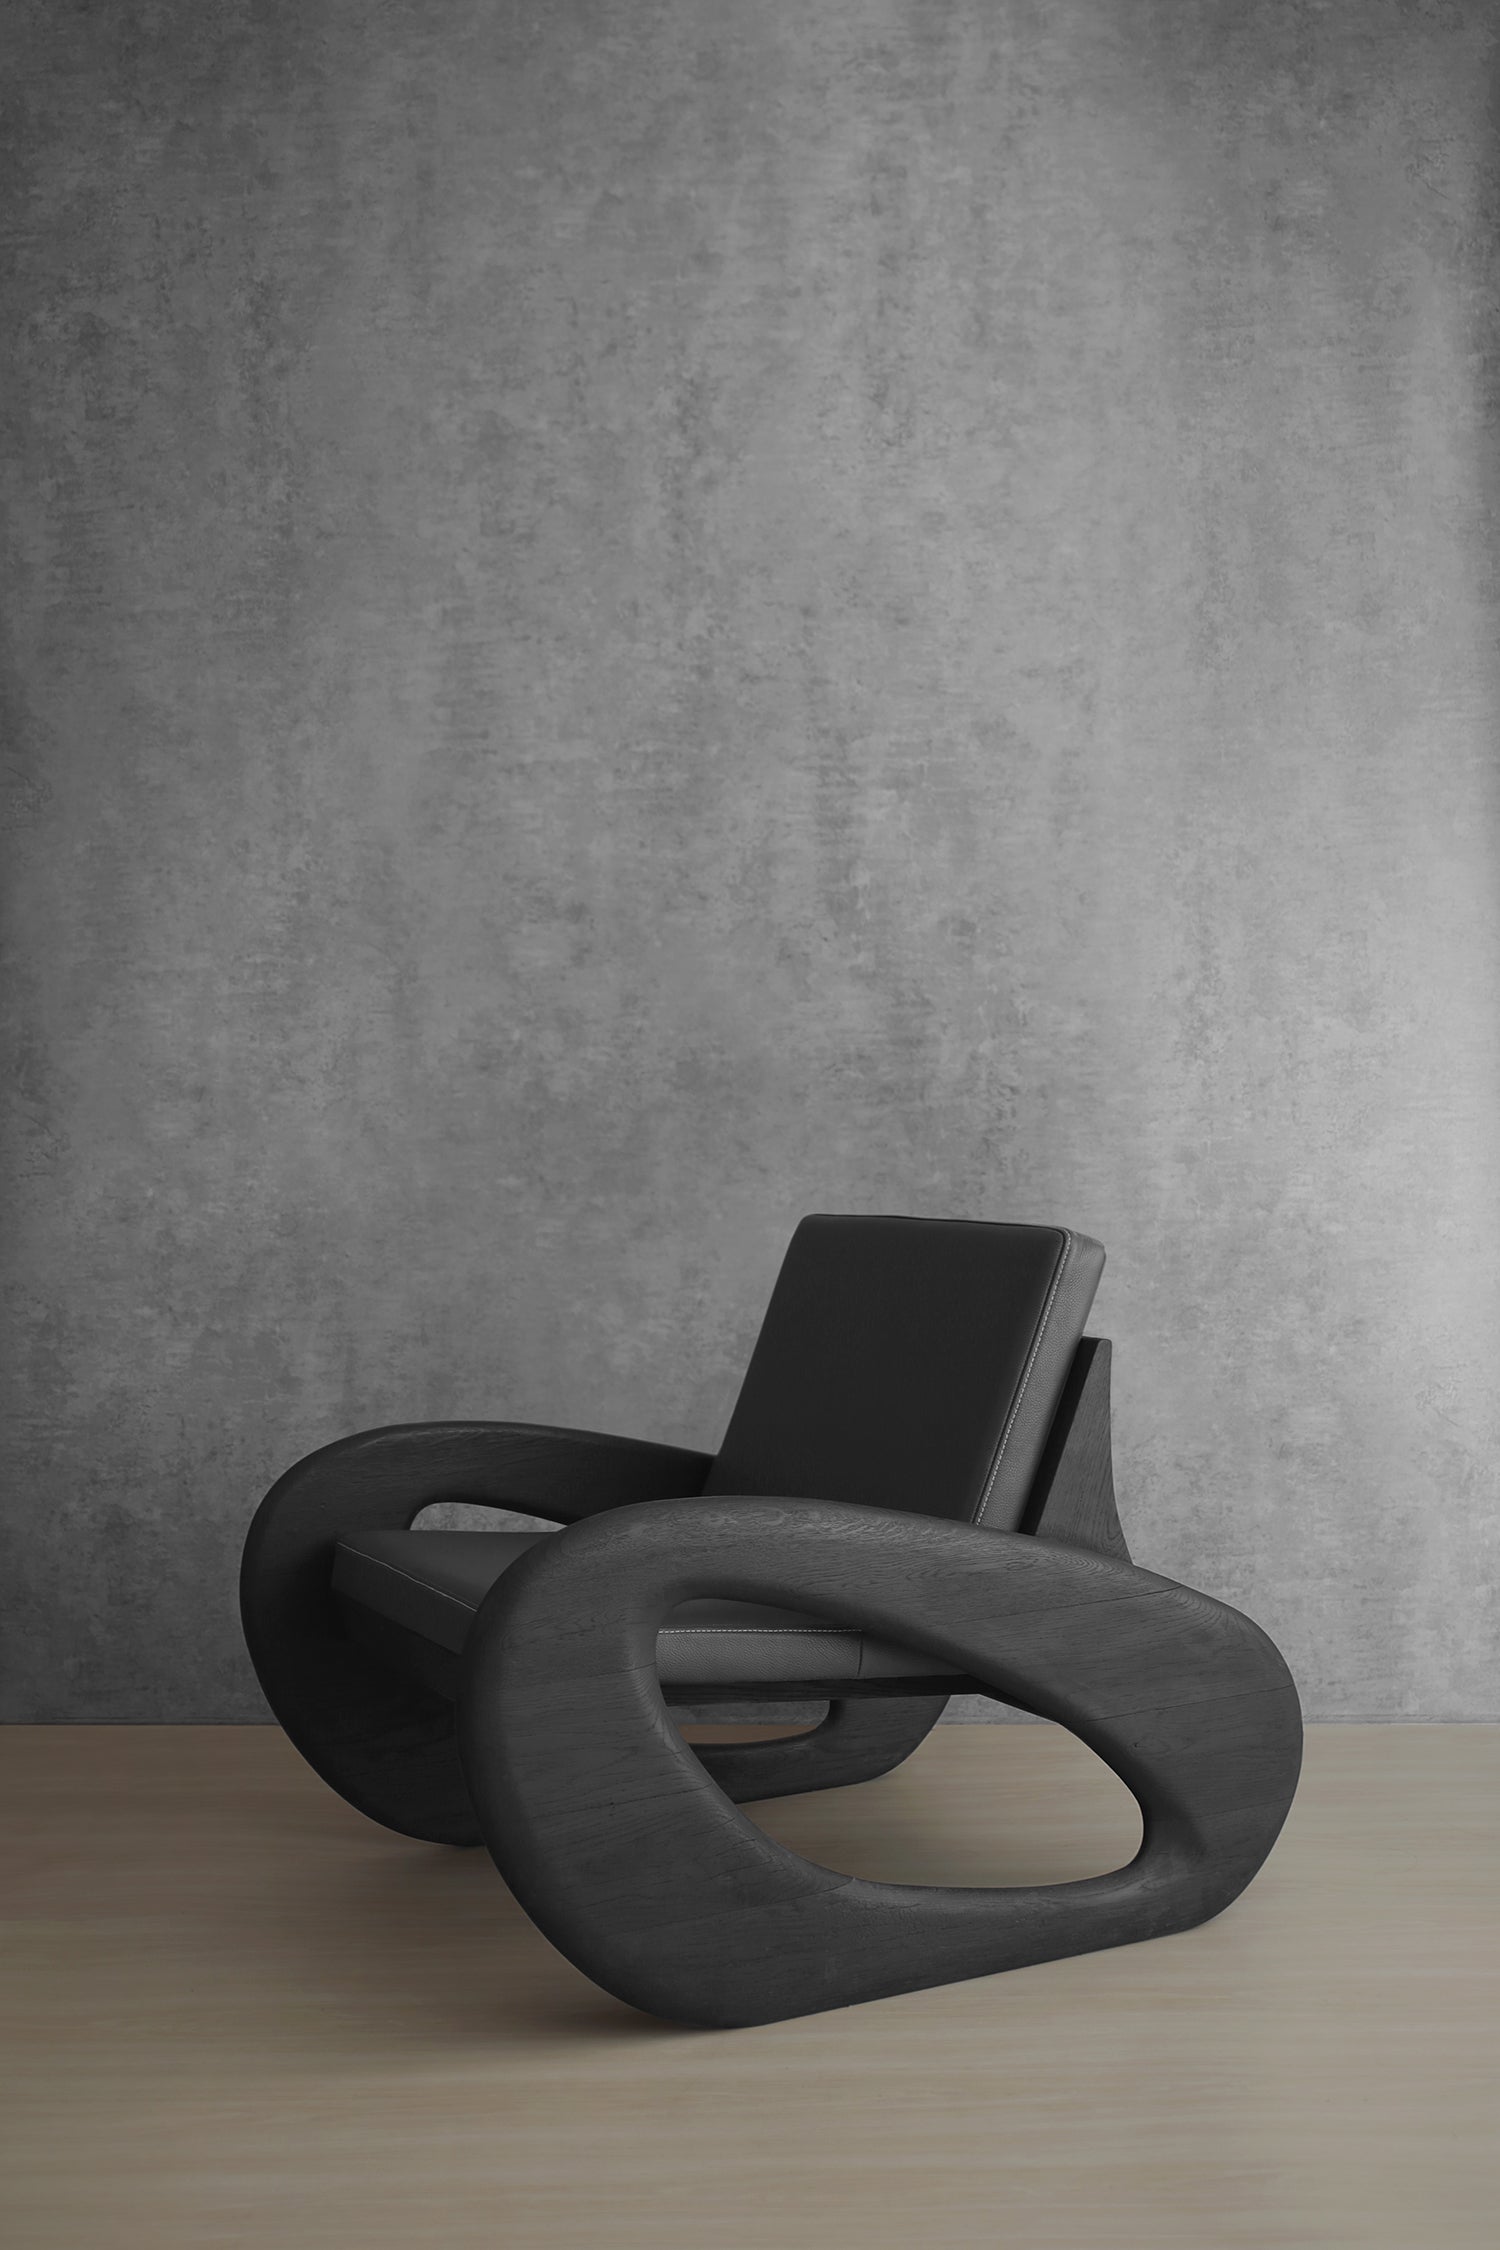 Black XVII Sherman lounge chair by Arturo Verástegui
Dimensions: D 82 x W 109 x H 81 cm
Materials: oak wood, leather.

Lounge chair made of white oak or burnt finish white oak option and leather.

Arturo Verástegui has been the director and